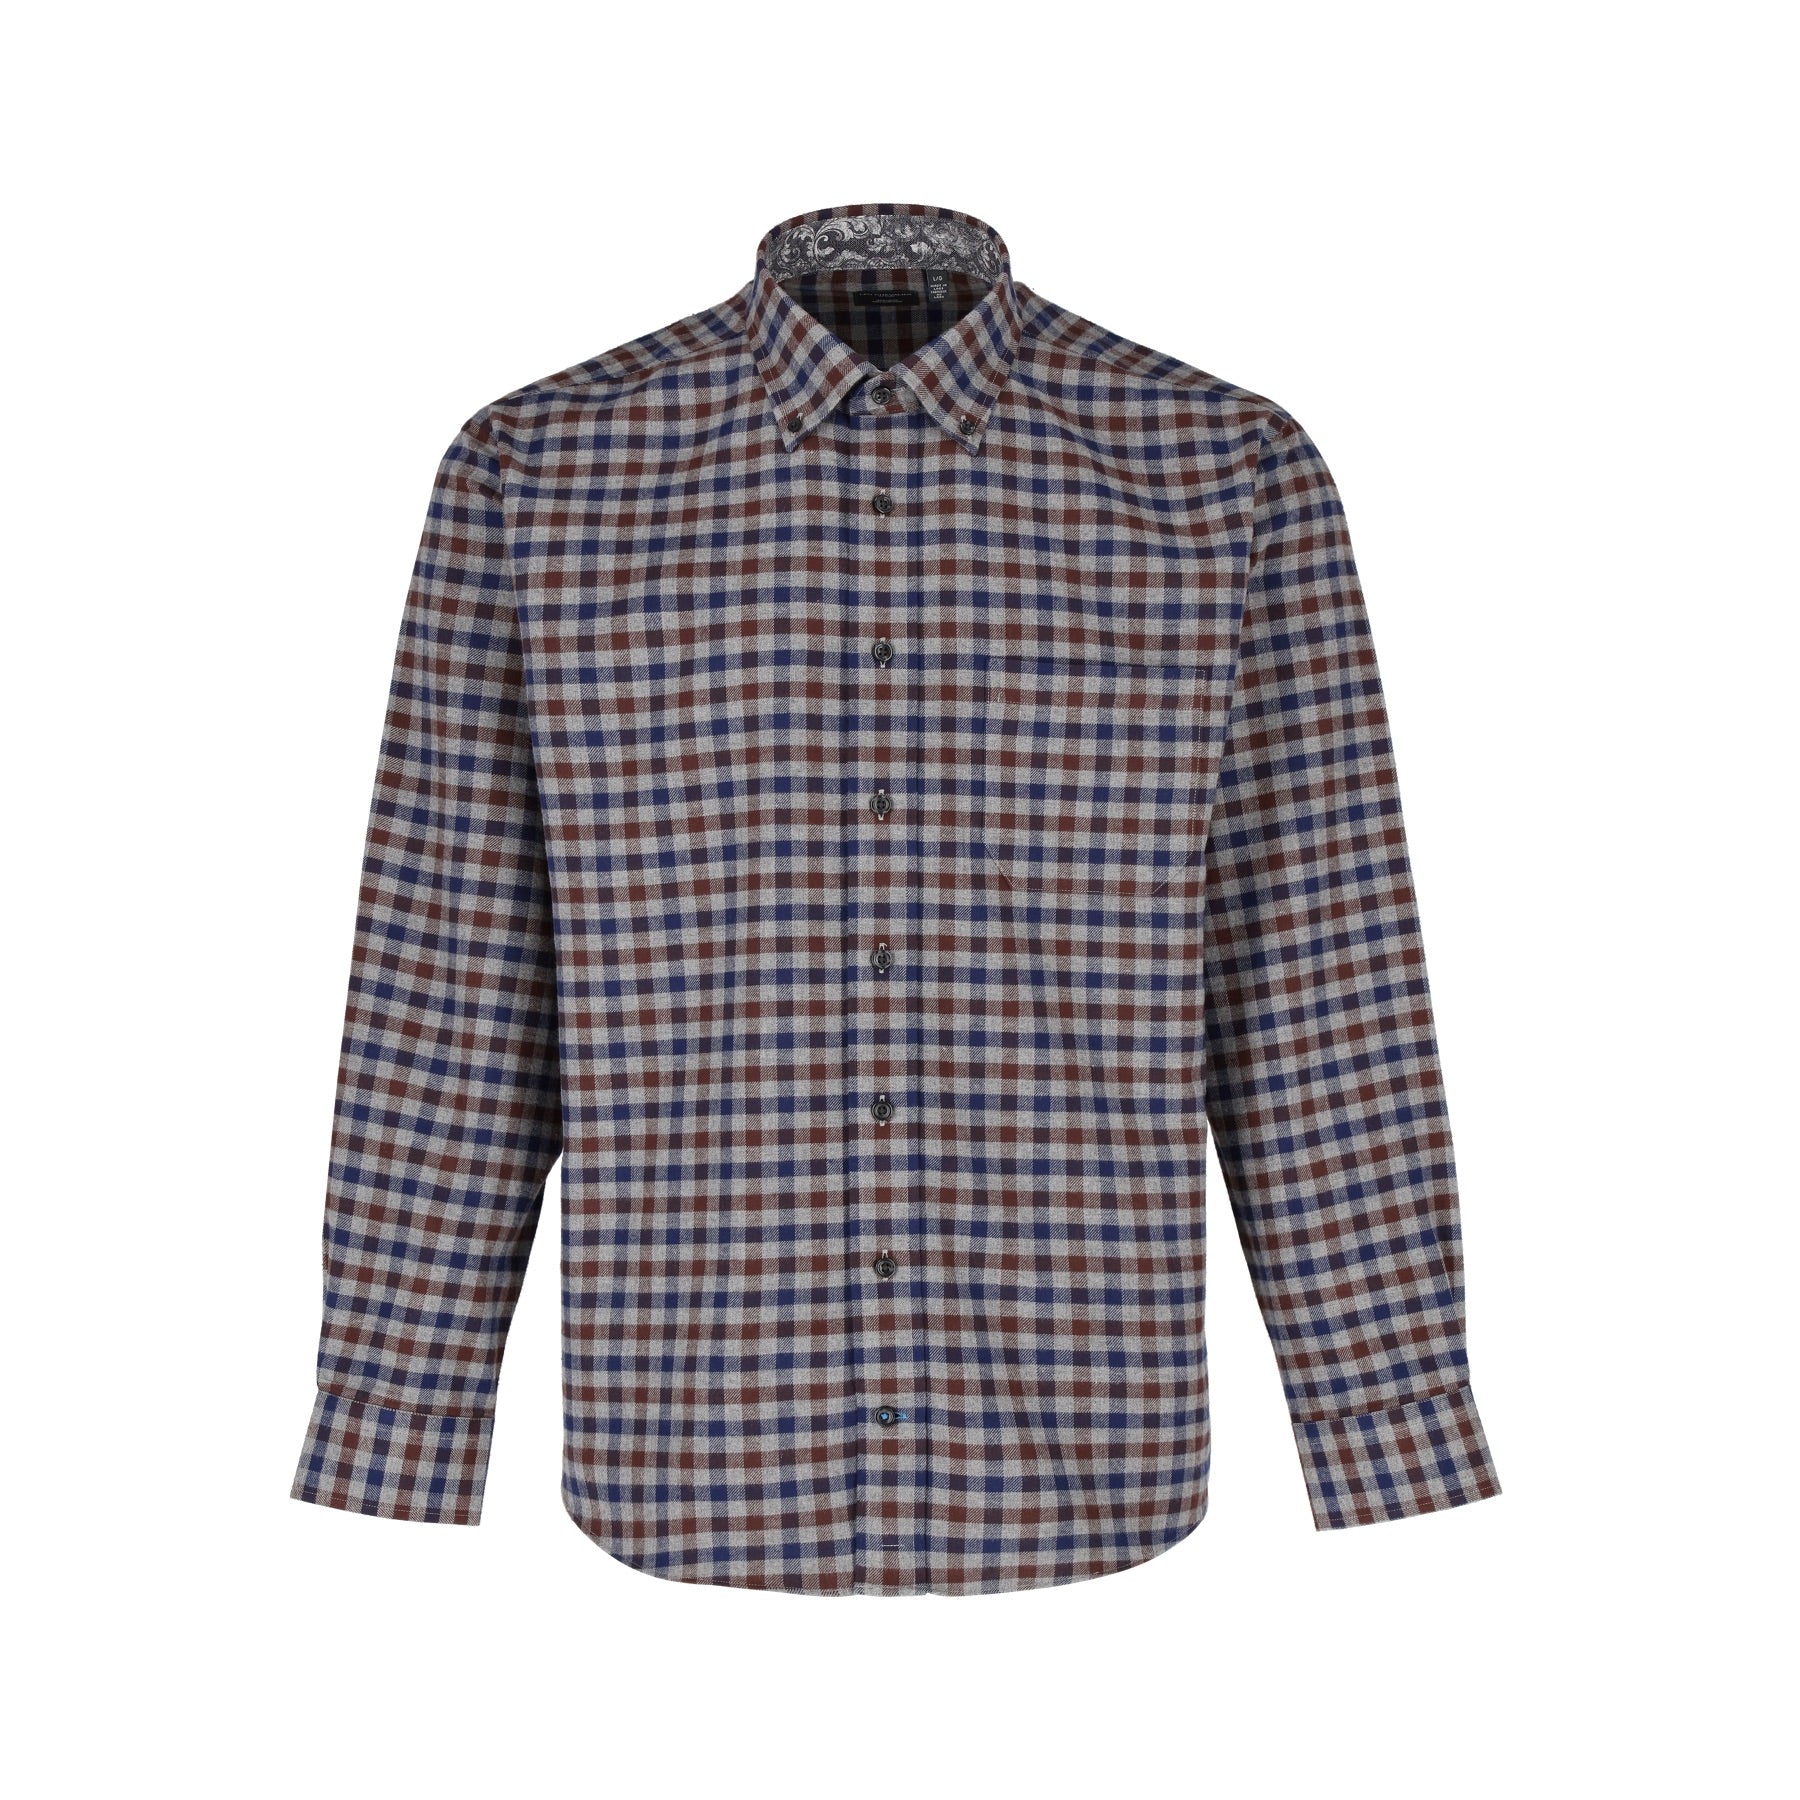 Grey, Blue, and Brown Check No-Iron Brushed Cotton Sport Shirt with Button Down Collar by Leo Chevalier